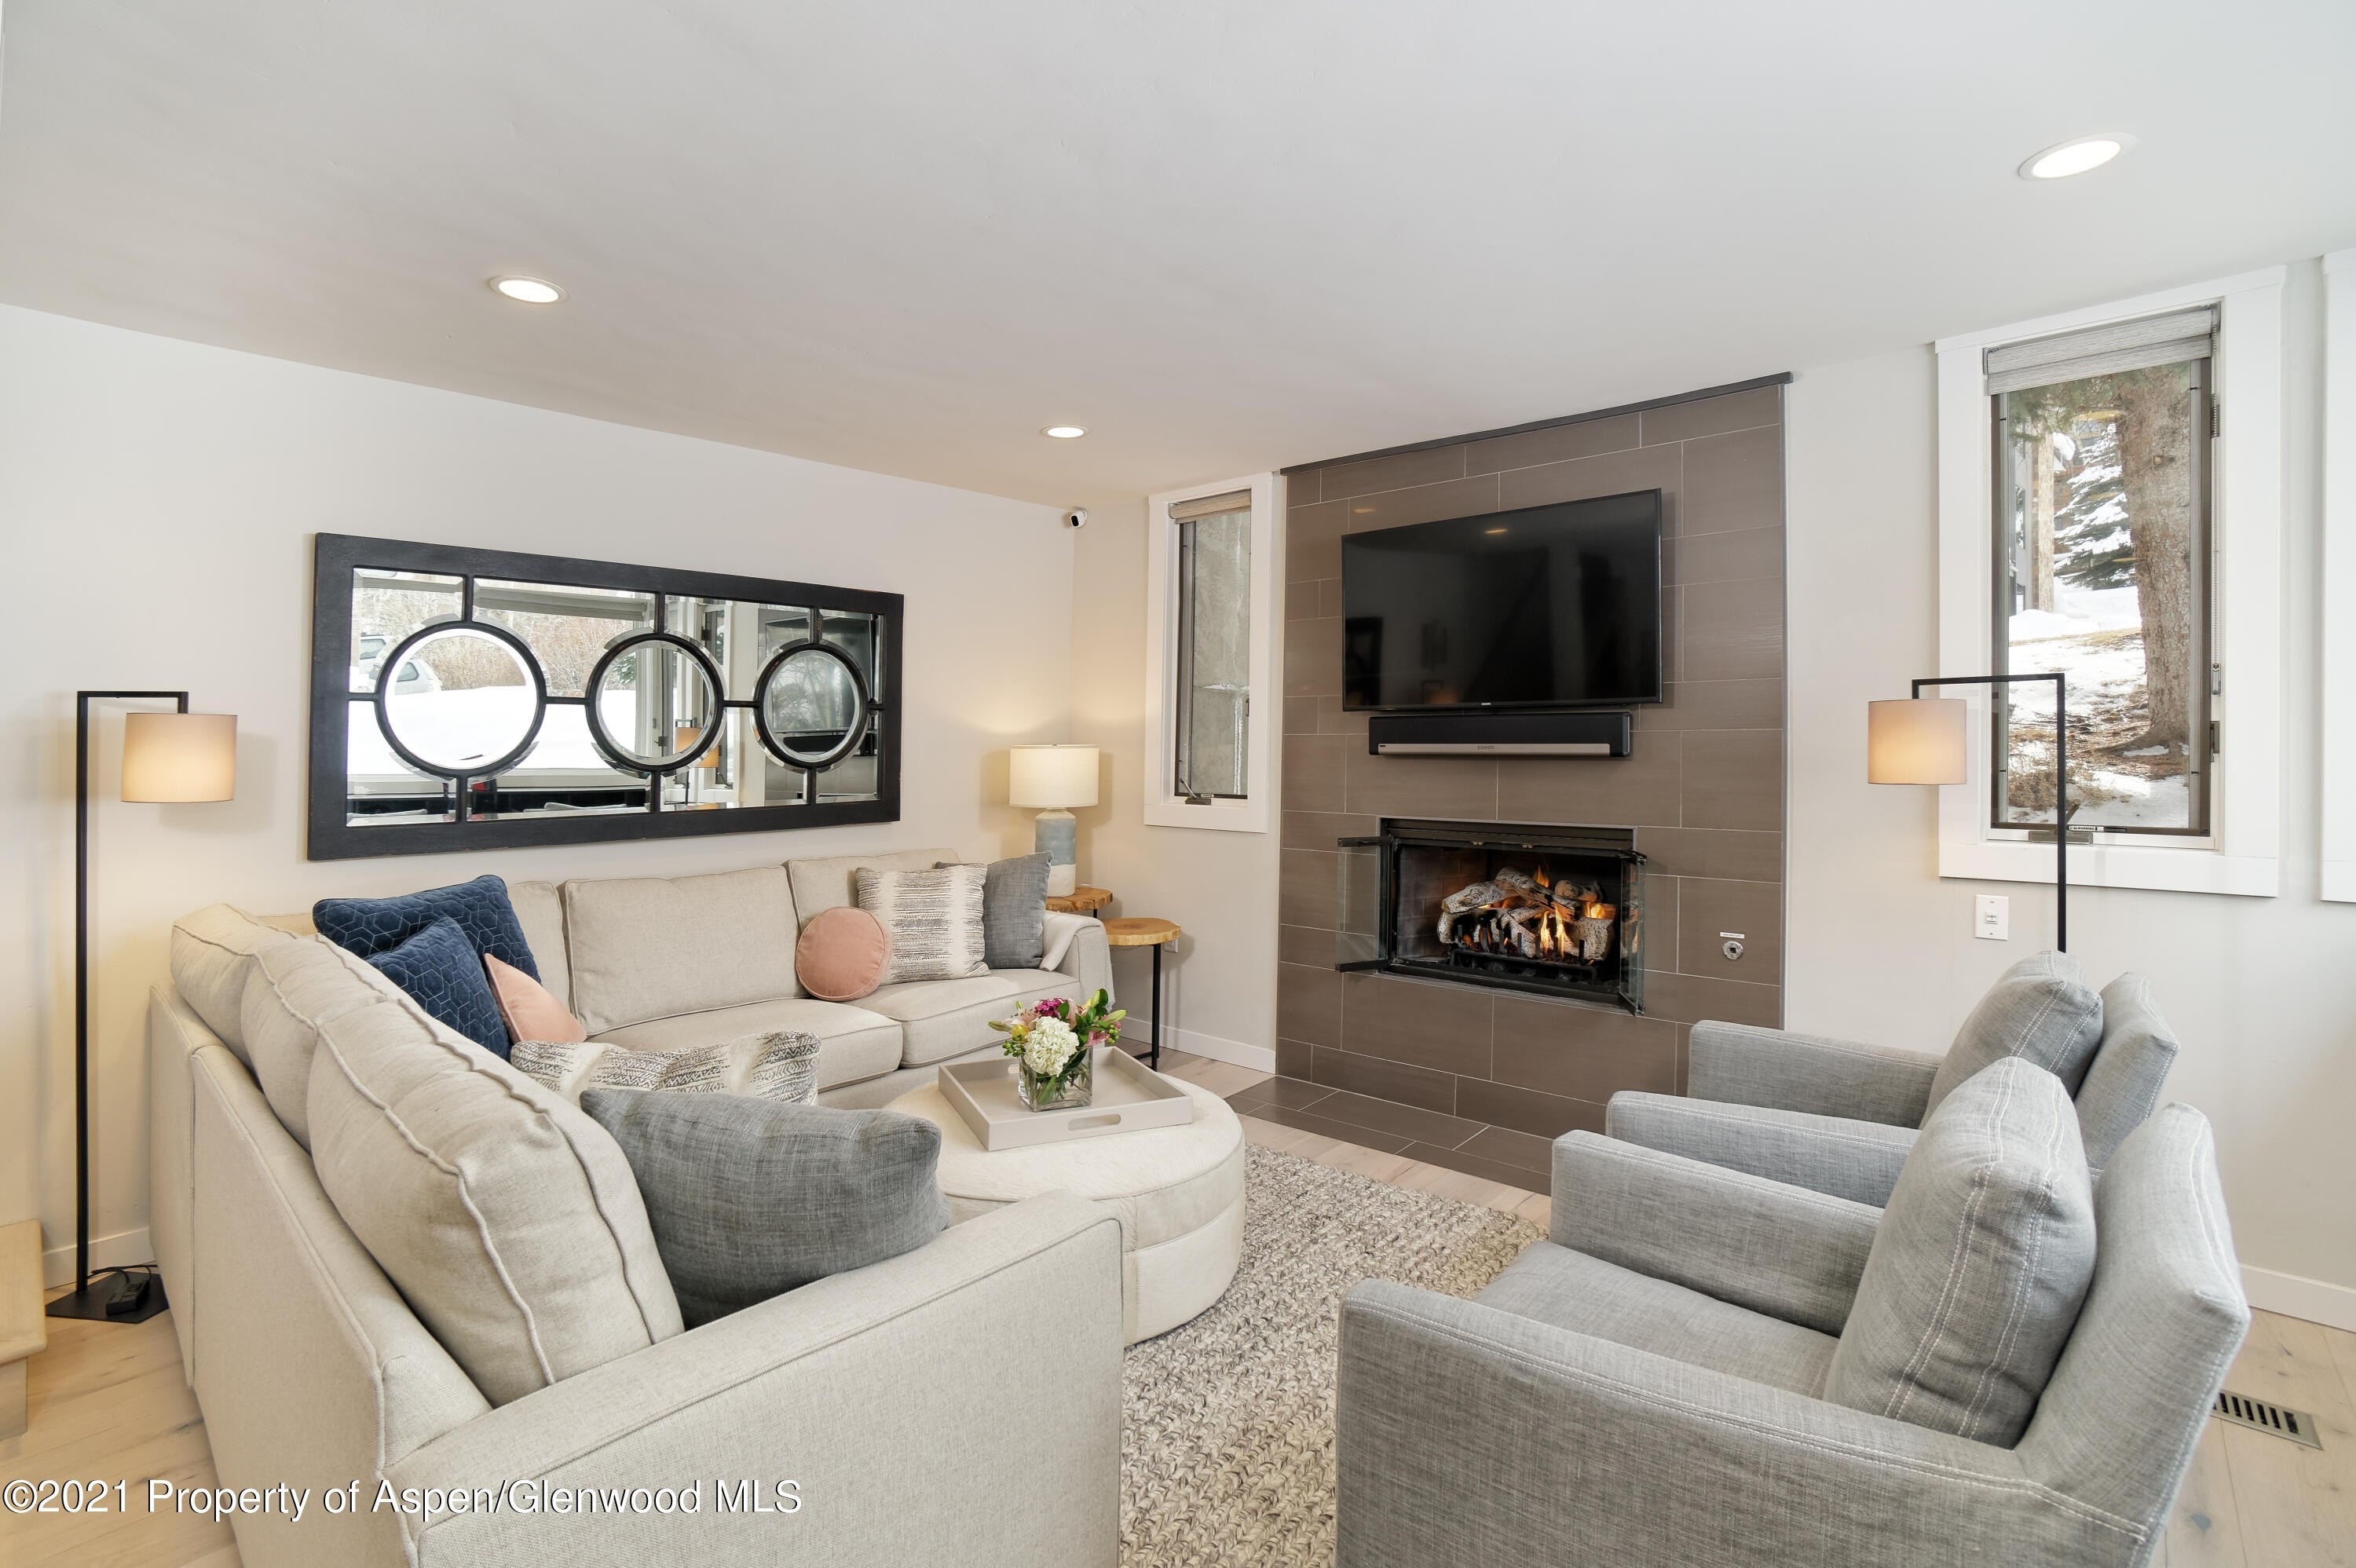 Single Family Home at 135 Carriage Way, Unit 4 Snowmass Village, CO 81615